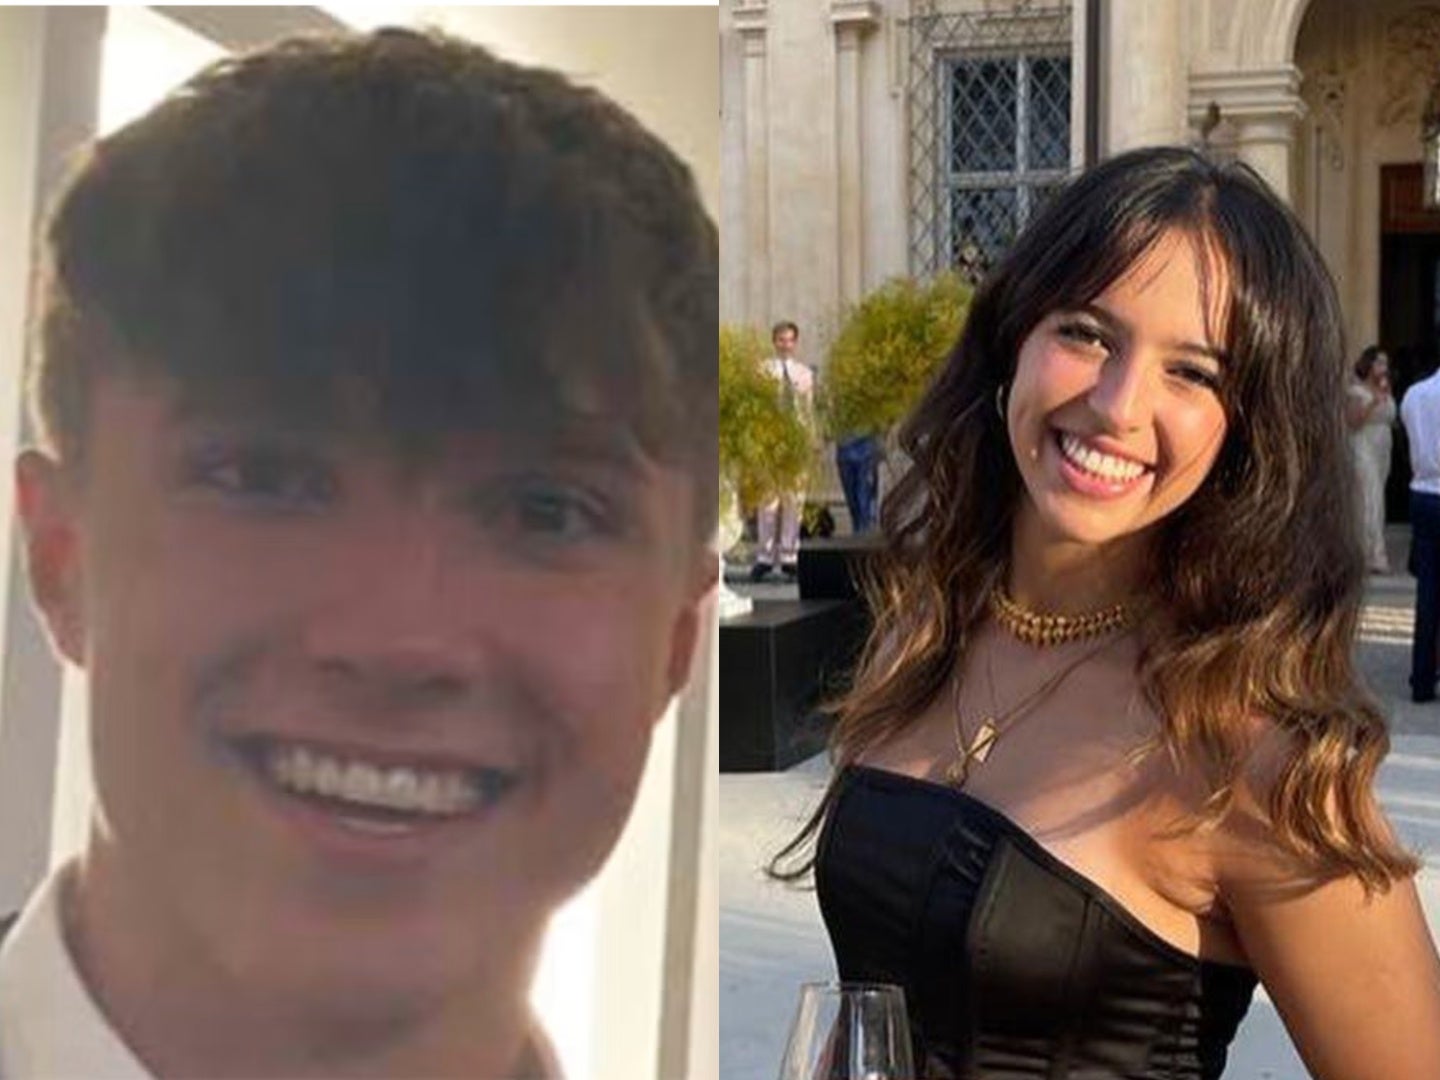 University of Nottingham students Barnaby Webber and Grace Kumar have been identified as the two 19-year-old victims